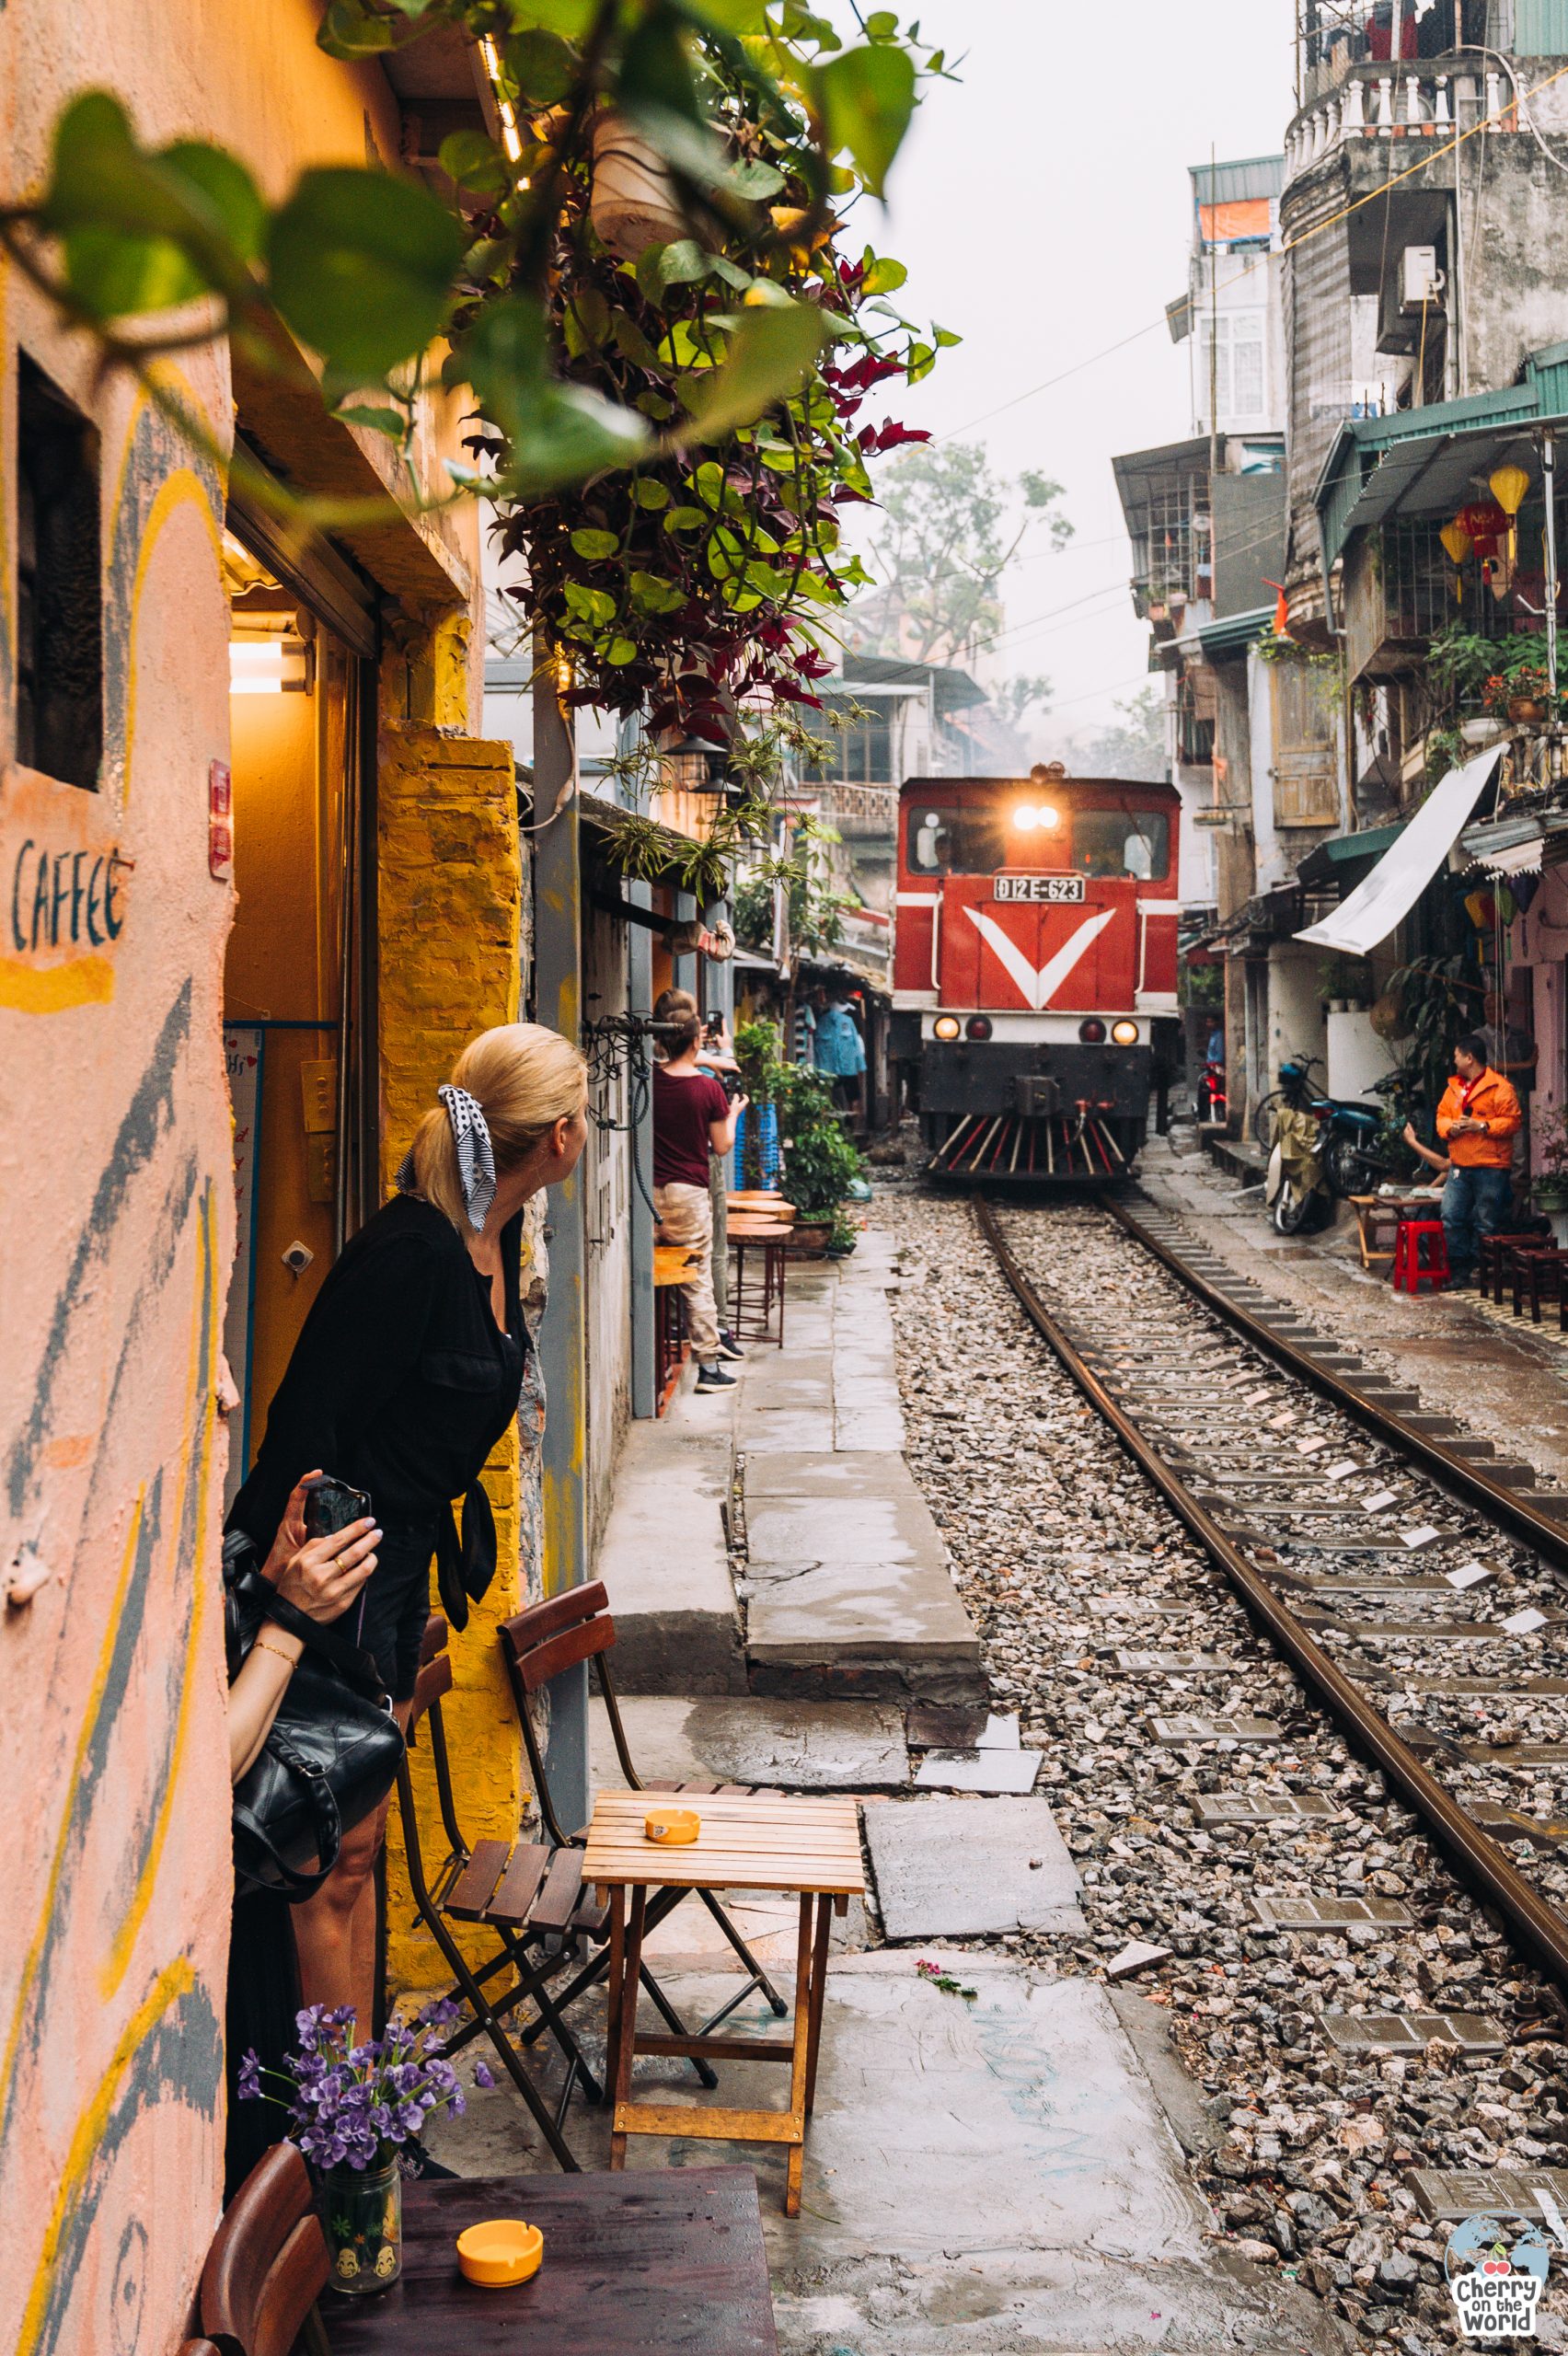 train passing by in the Train Street Hanoi